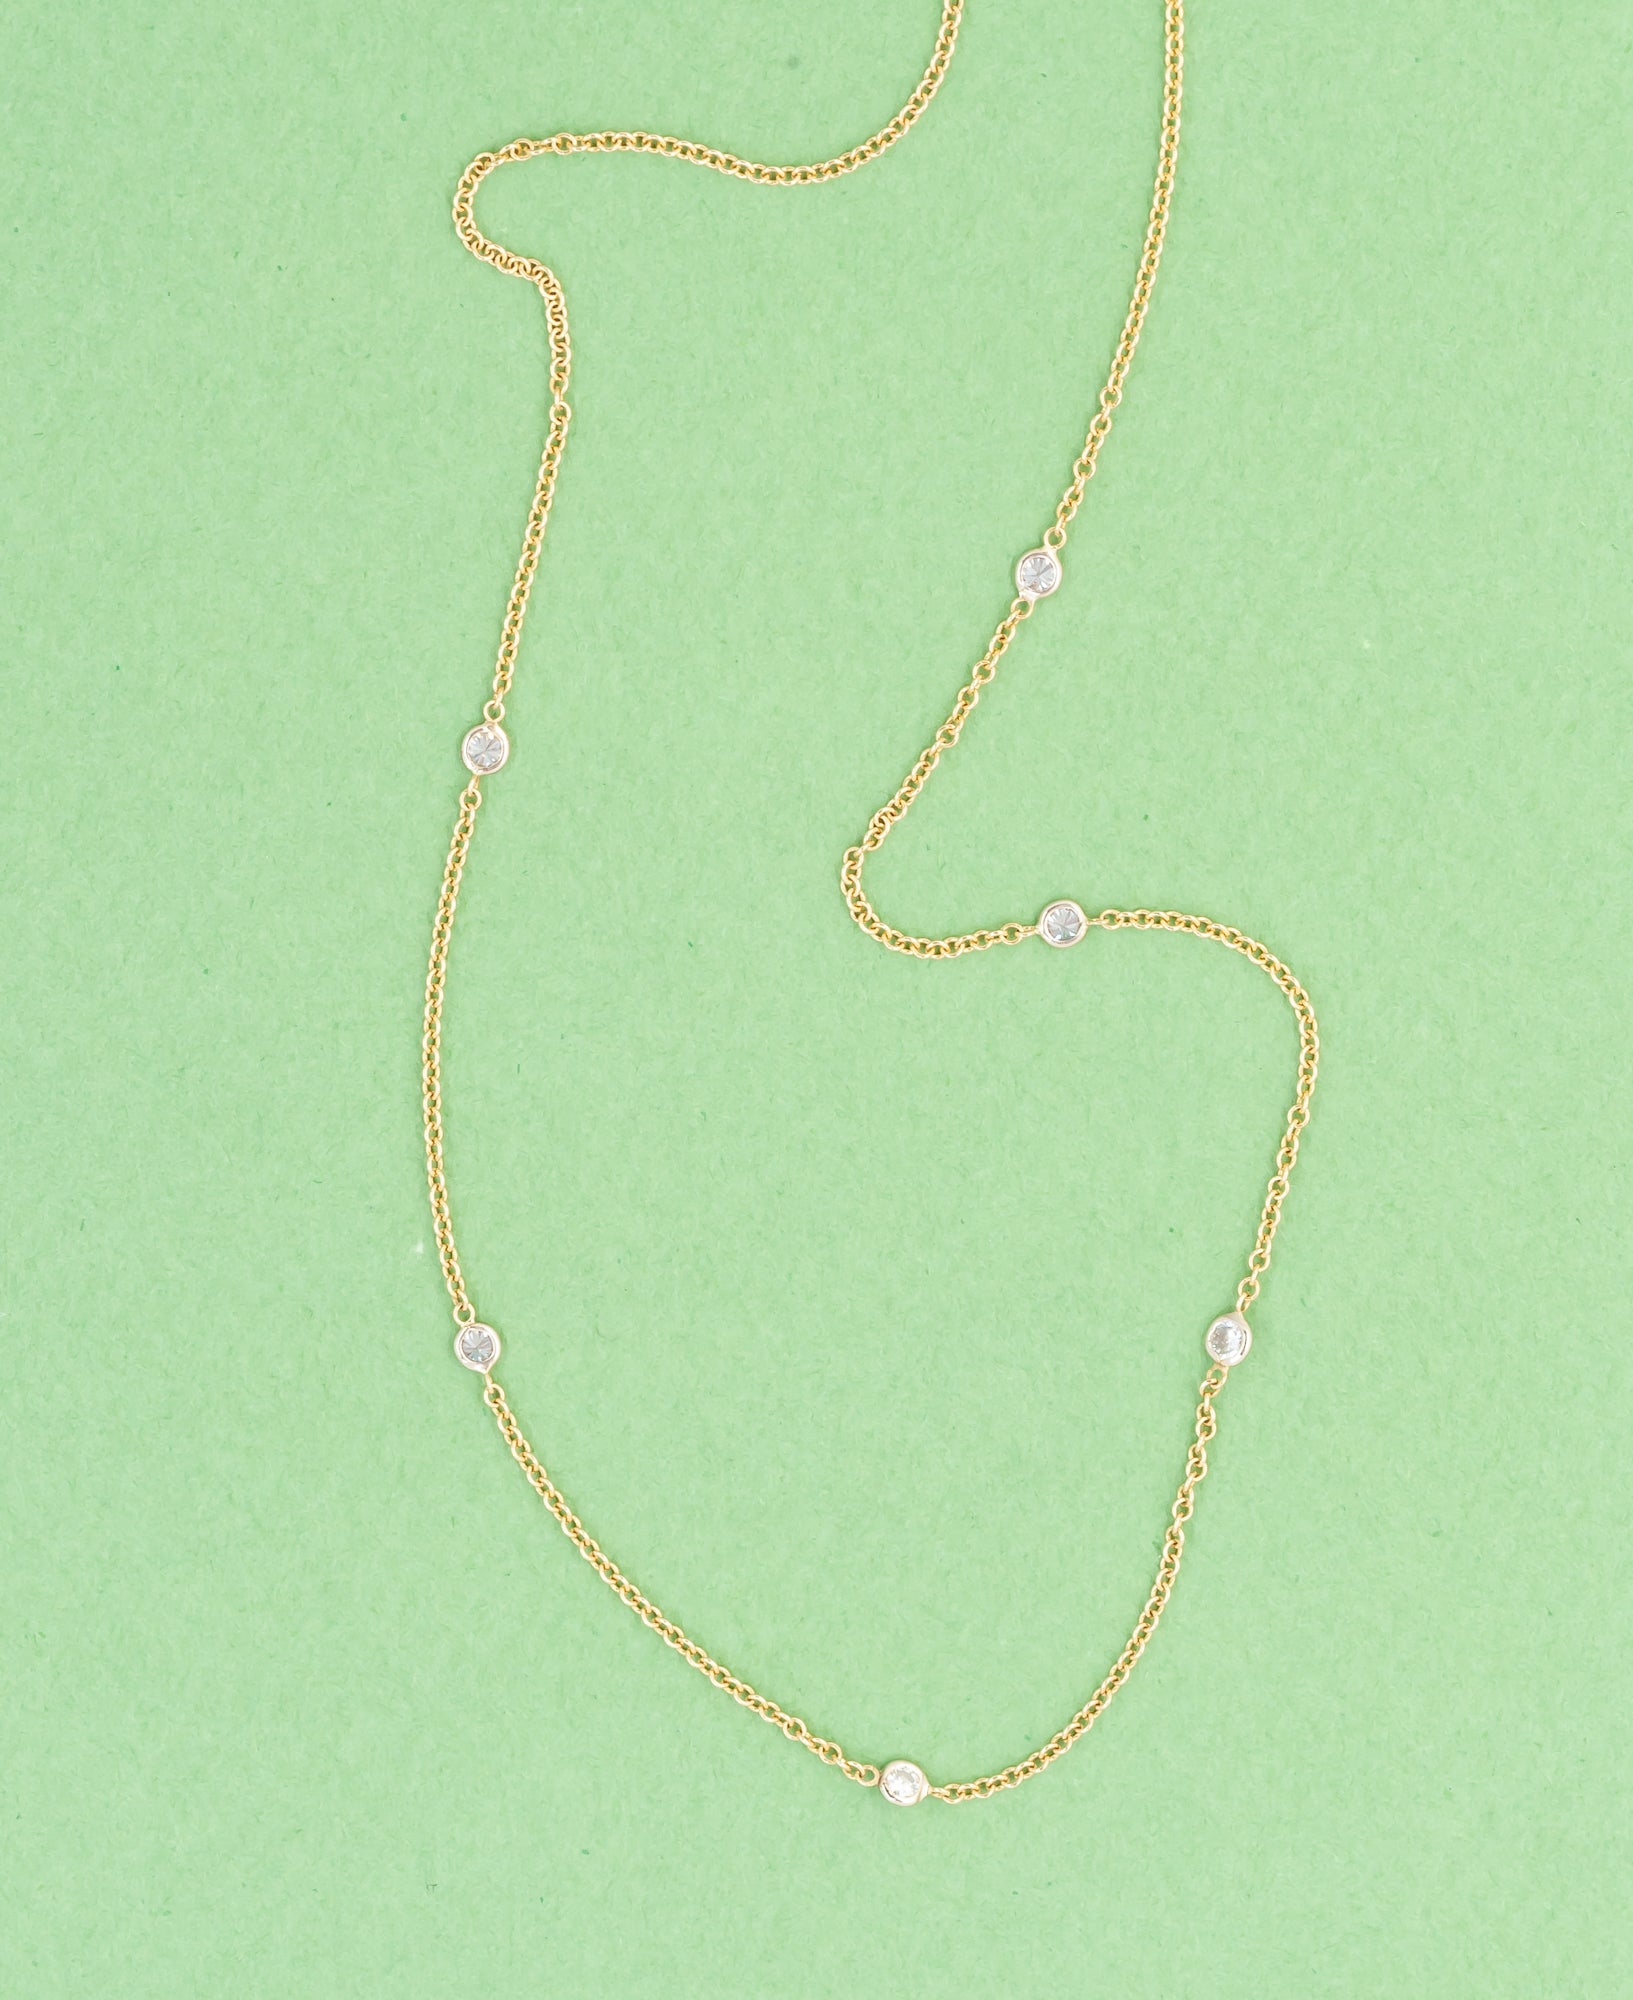 Tiny antique diamonds set in a delicate 14kt yellow gold chain.